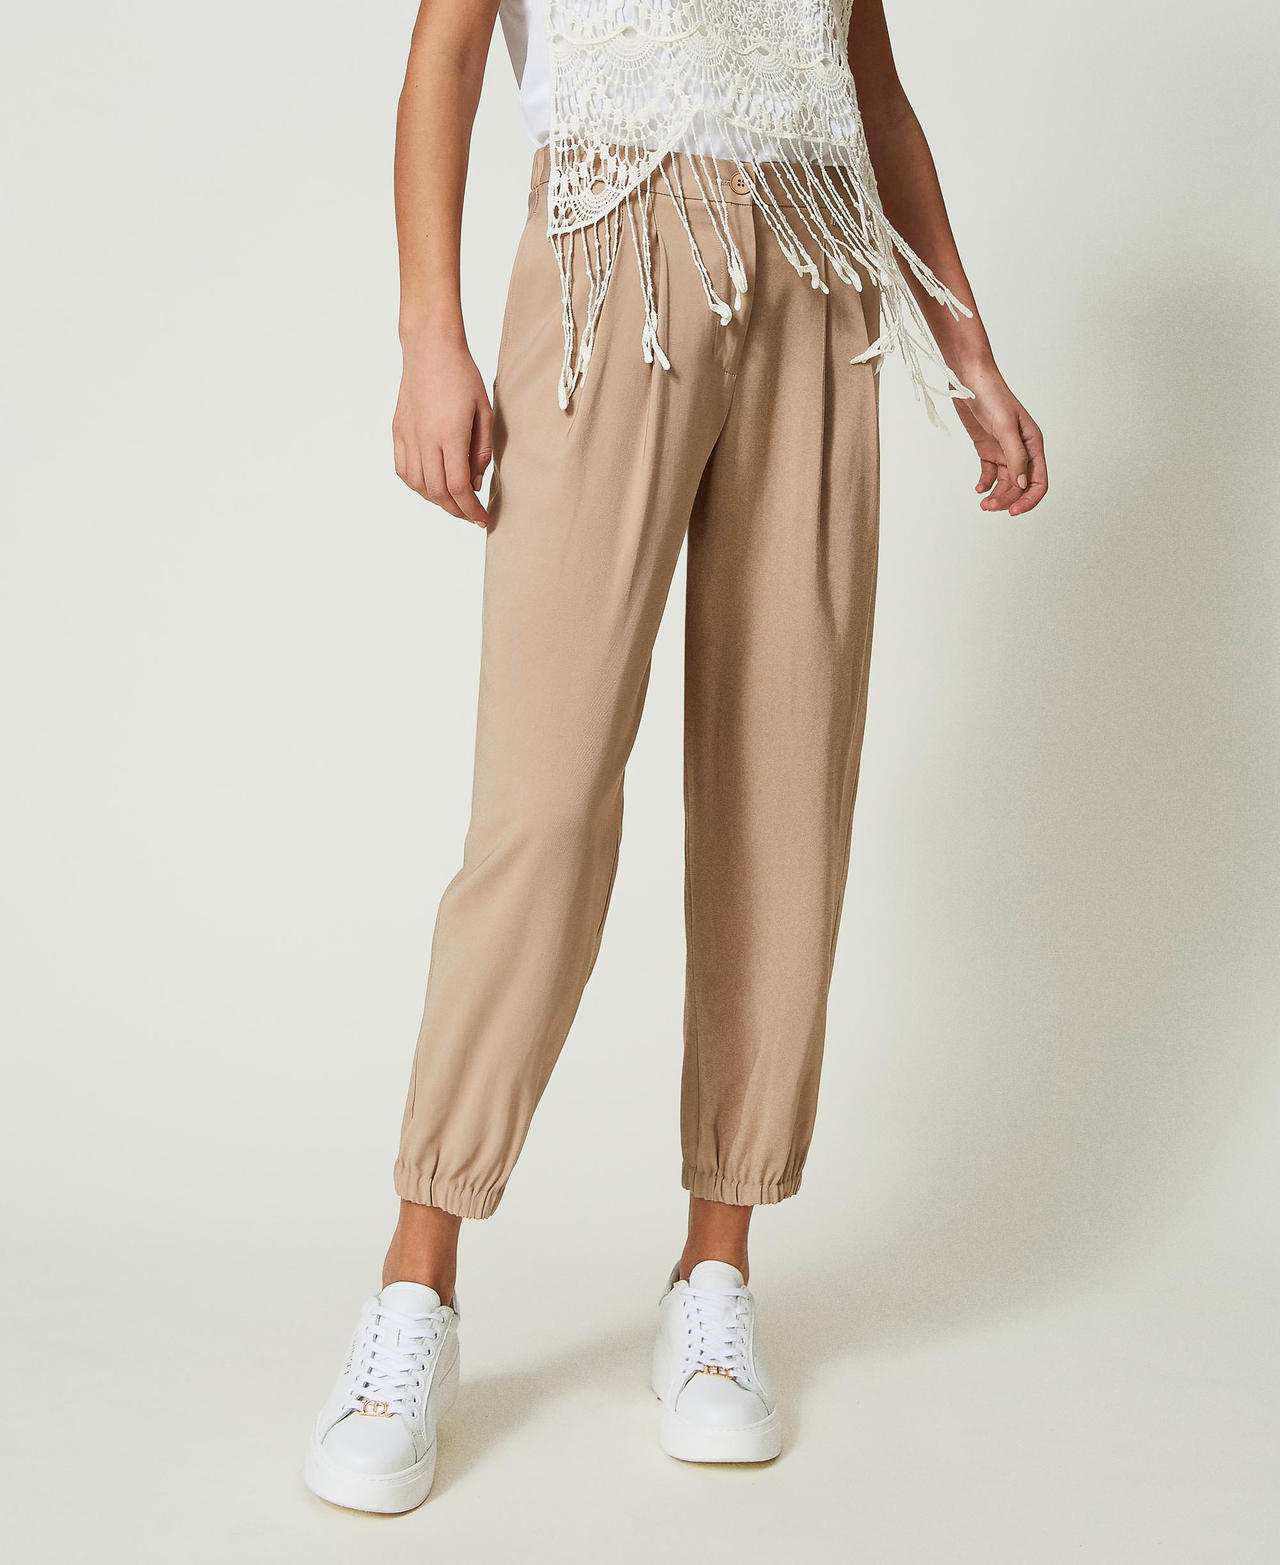 Joggers con pliegues Marrón "Medal Bronze" Mujer 241AT2114-02